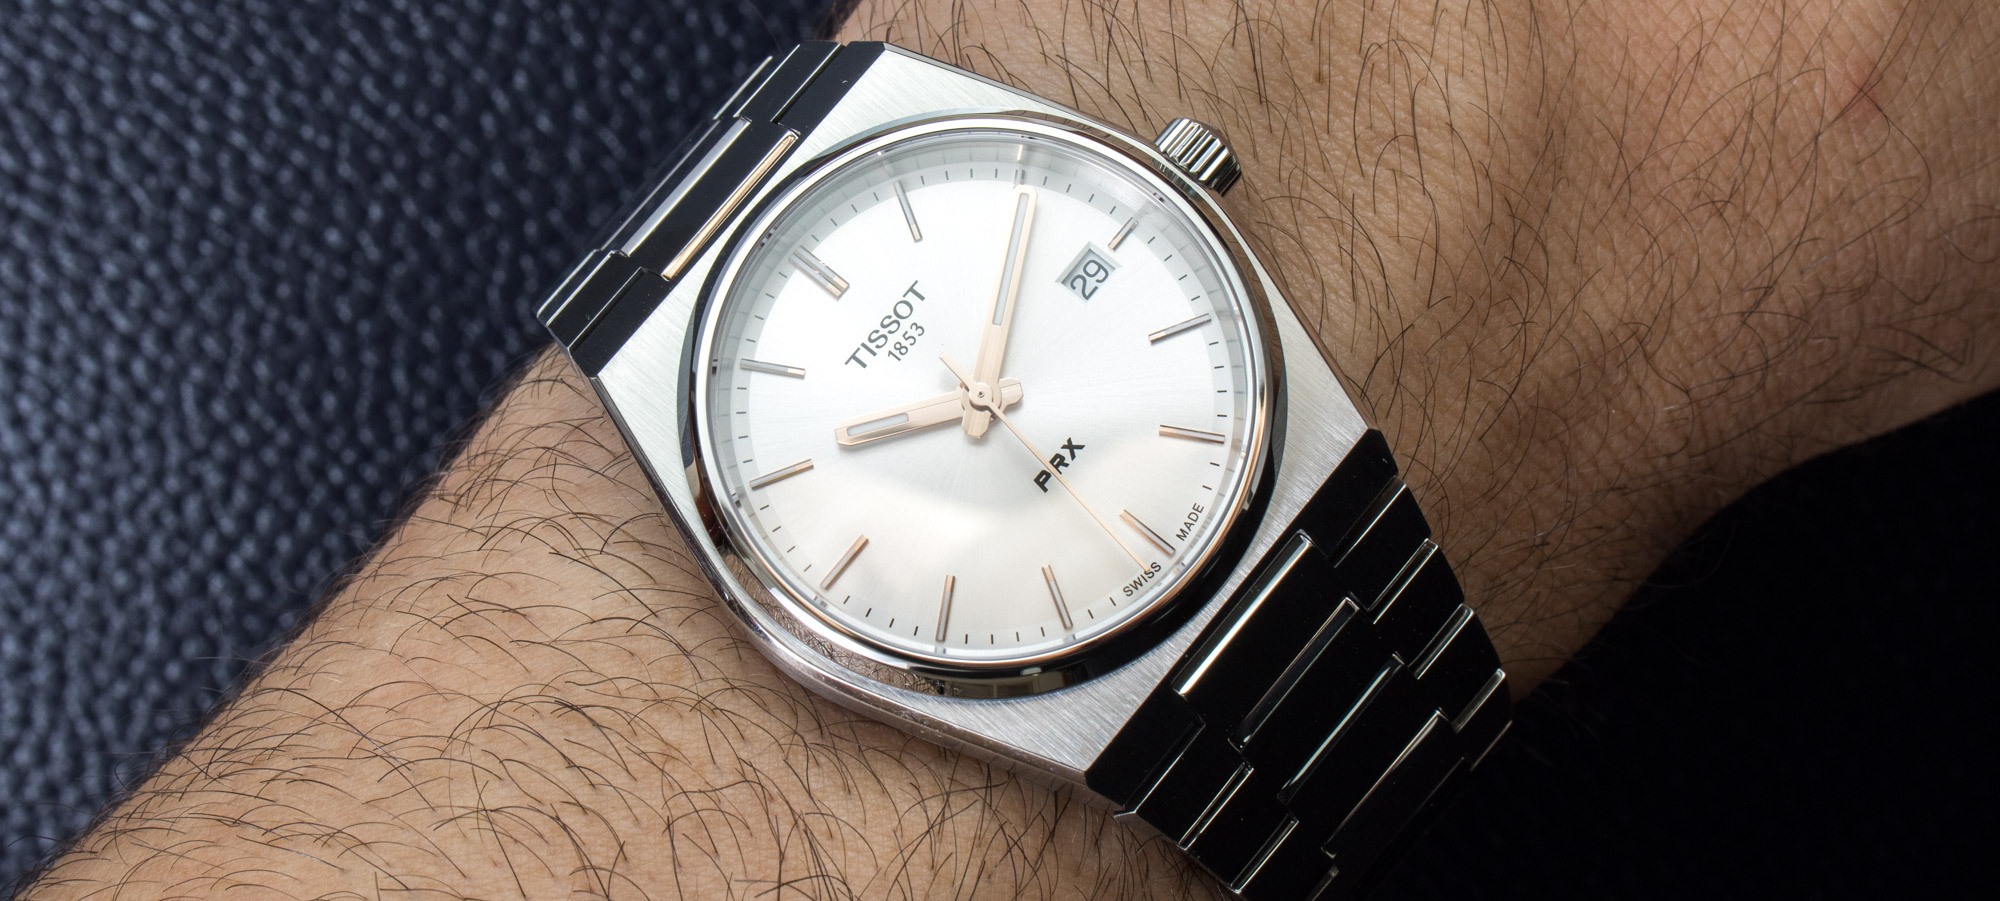 Hands On: Tissot PRX Automatic Chronograph